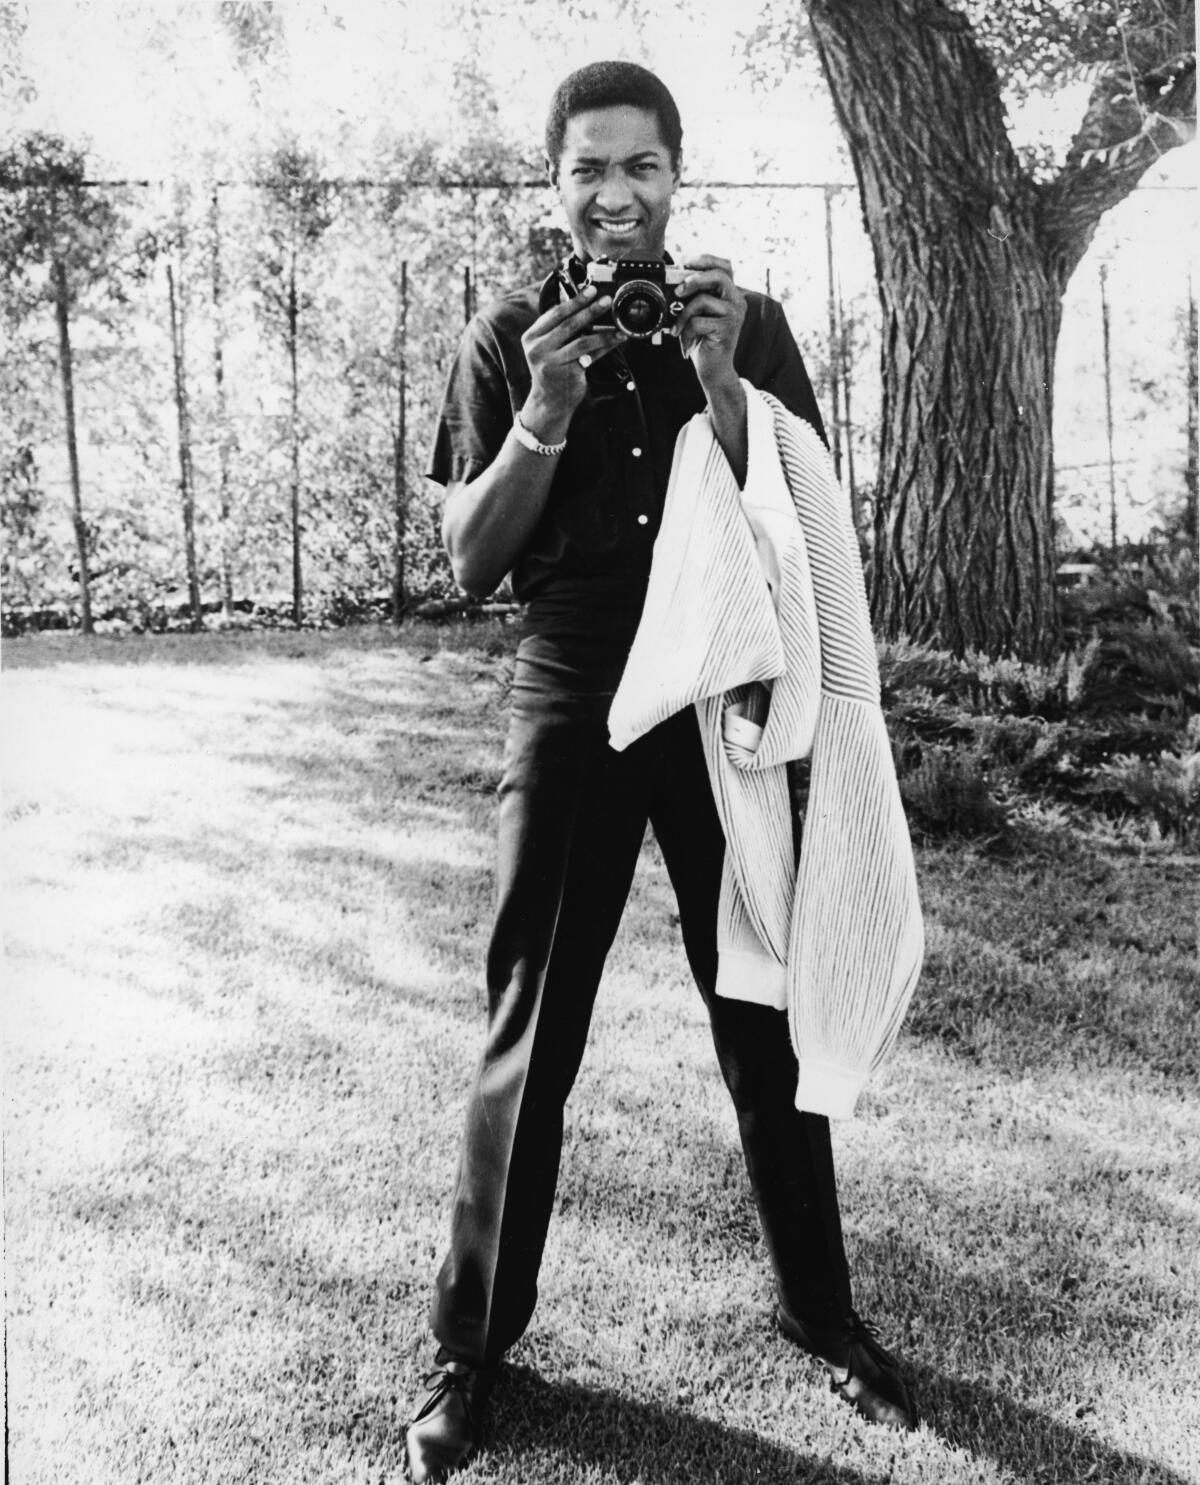 Sam Cooke, pictured in the early 1960s, is portrayed in the film by Leslie Odom Jr.